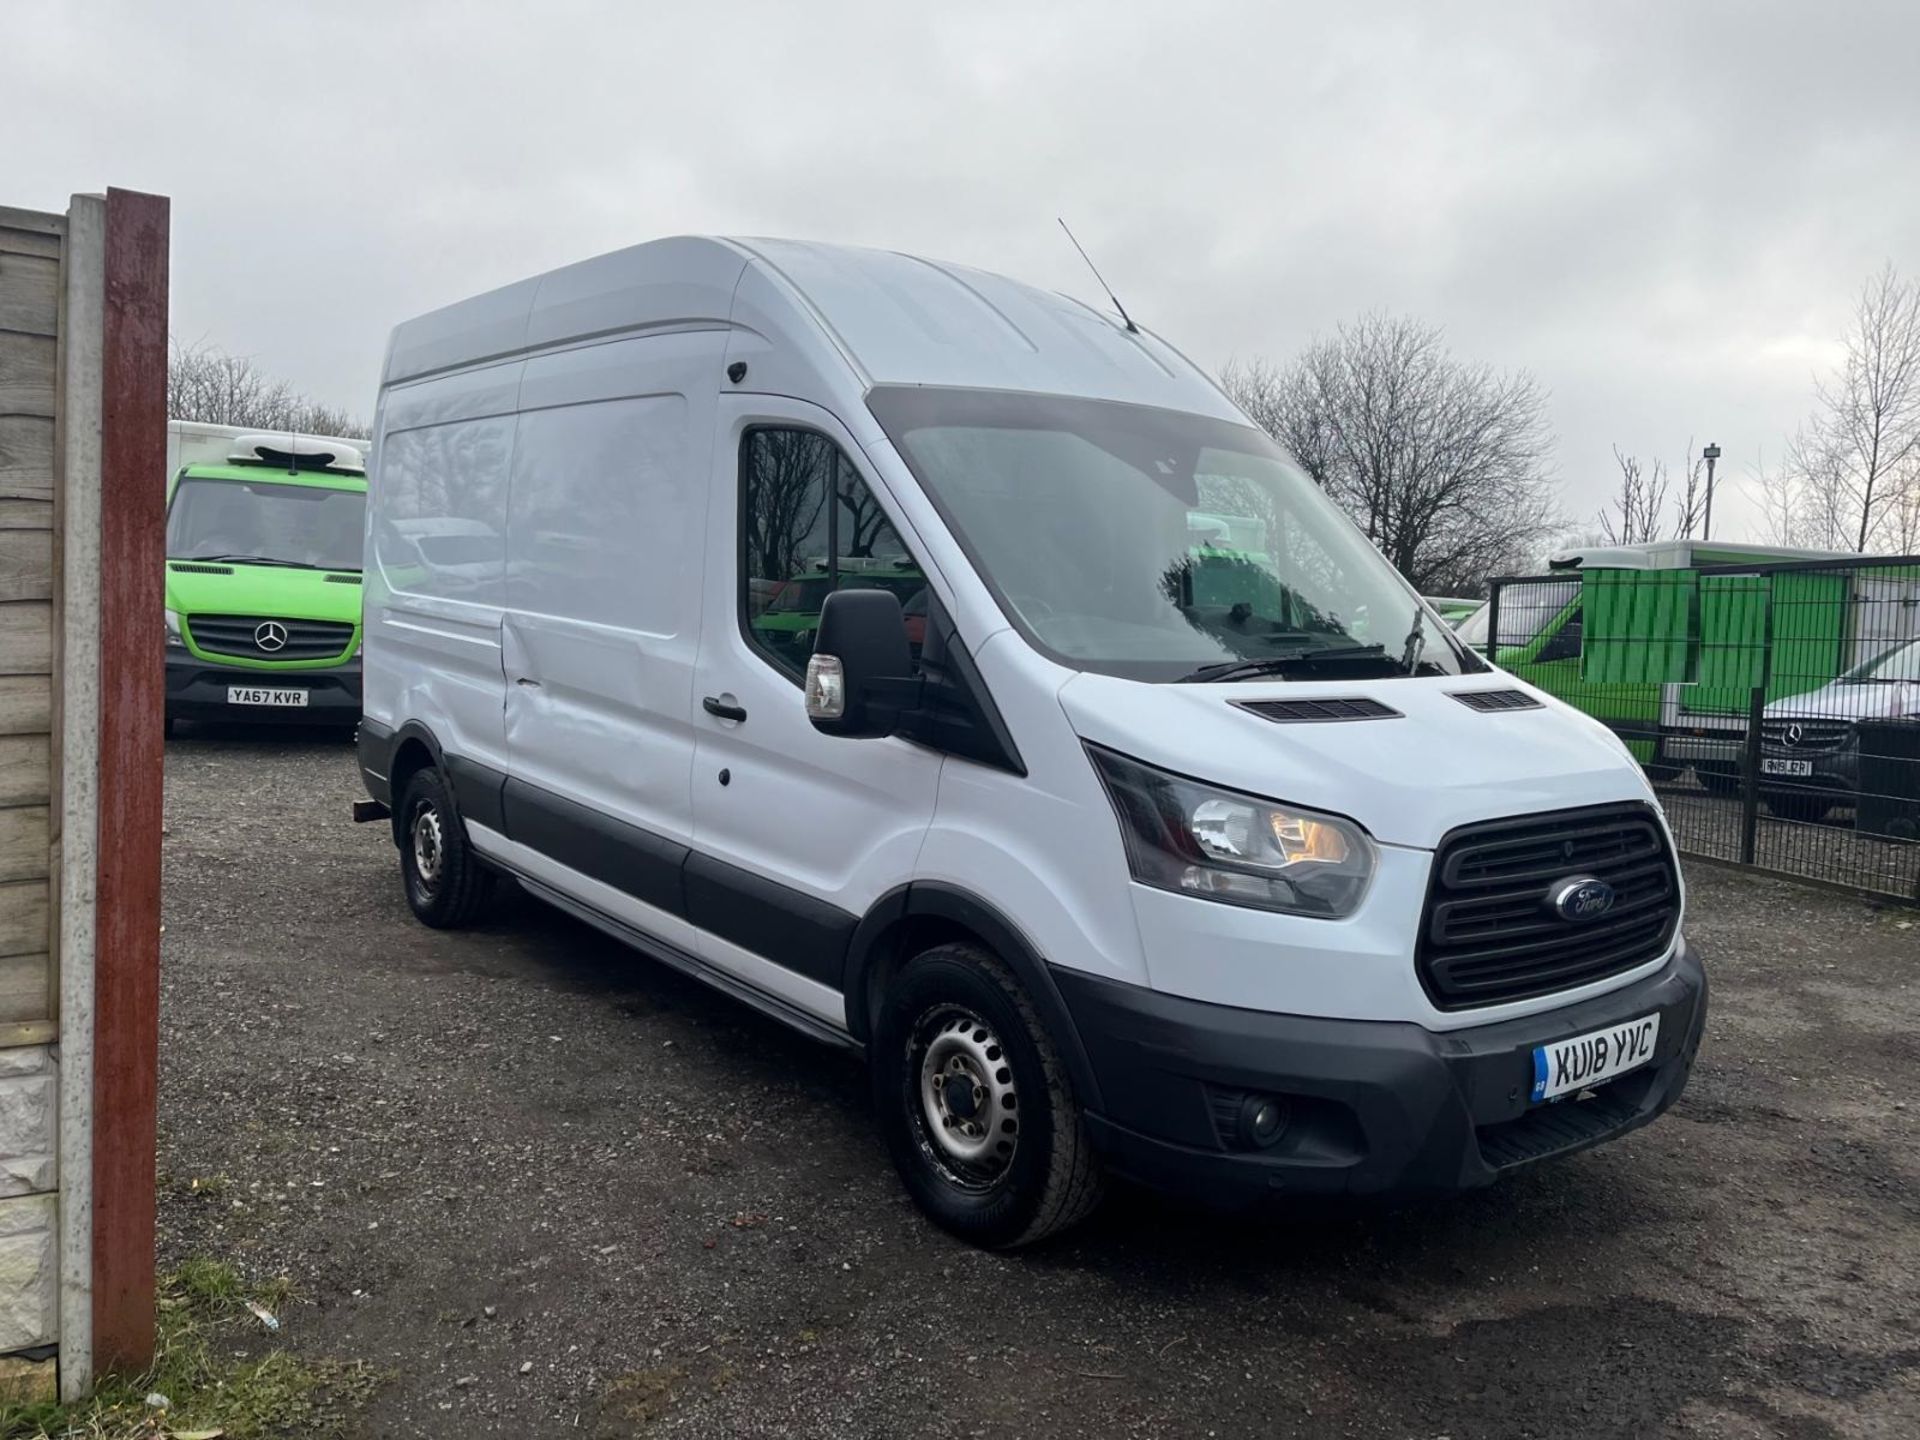 2018 FORD TRANSIT 2.0 TDCI 130PS L3 H3 - RELIABLE AND SPACIOUS LONG WHEELBASE PANEL VAN